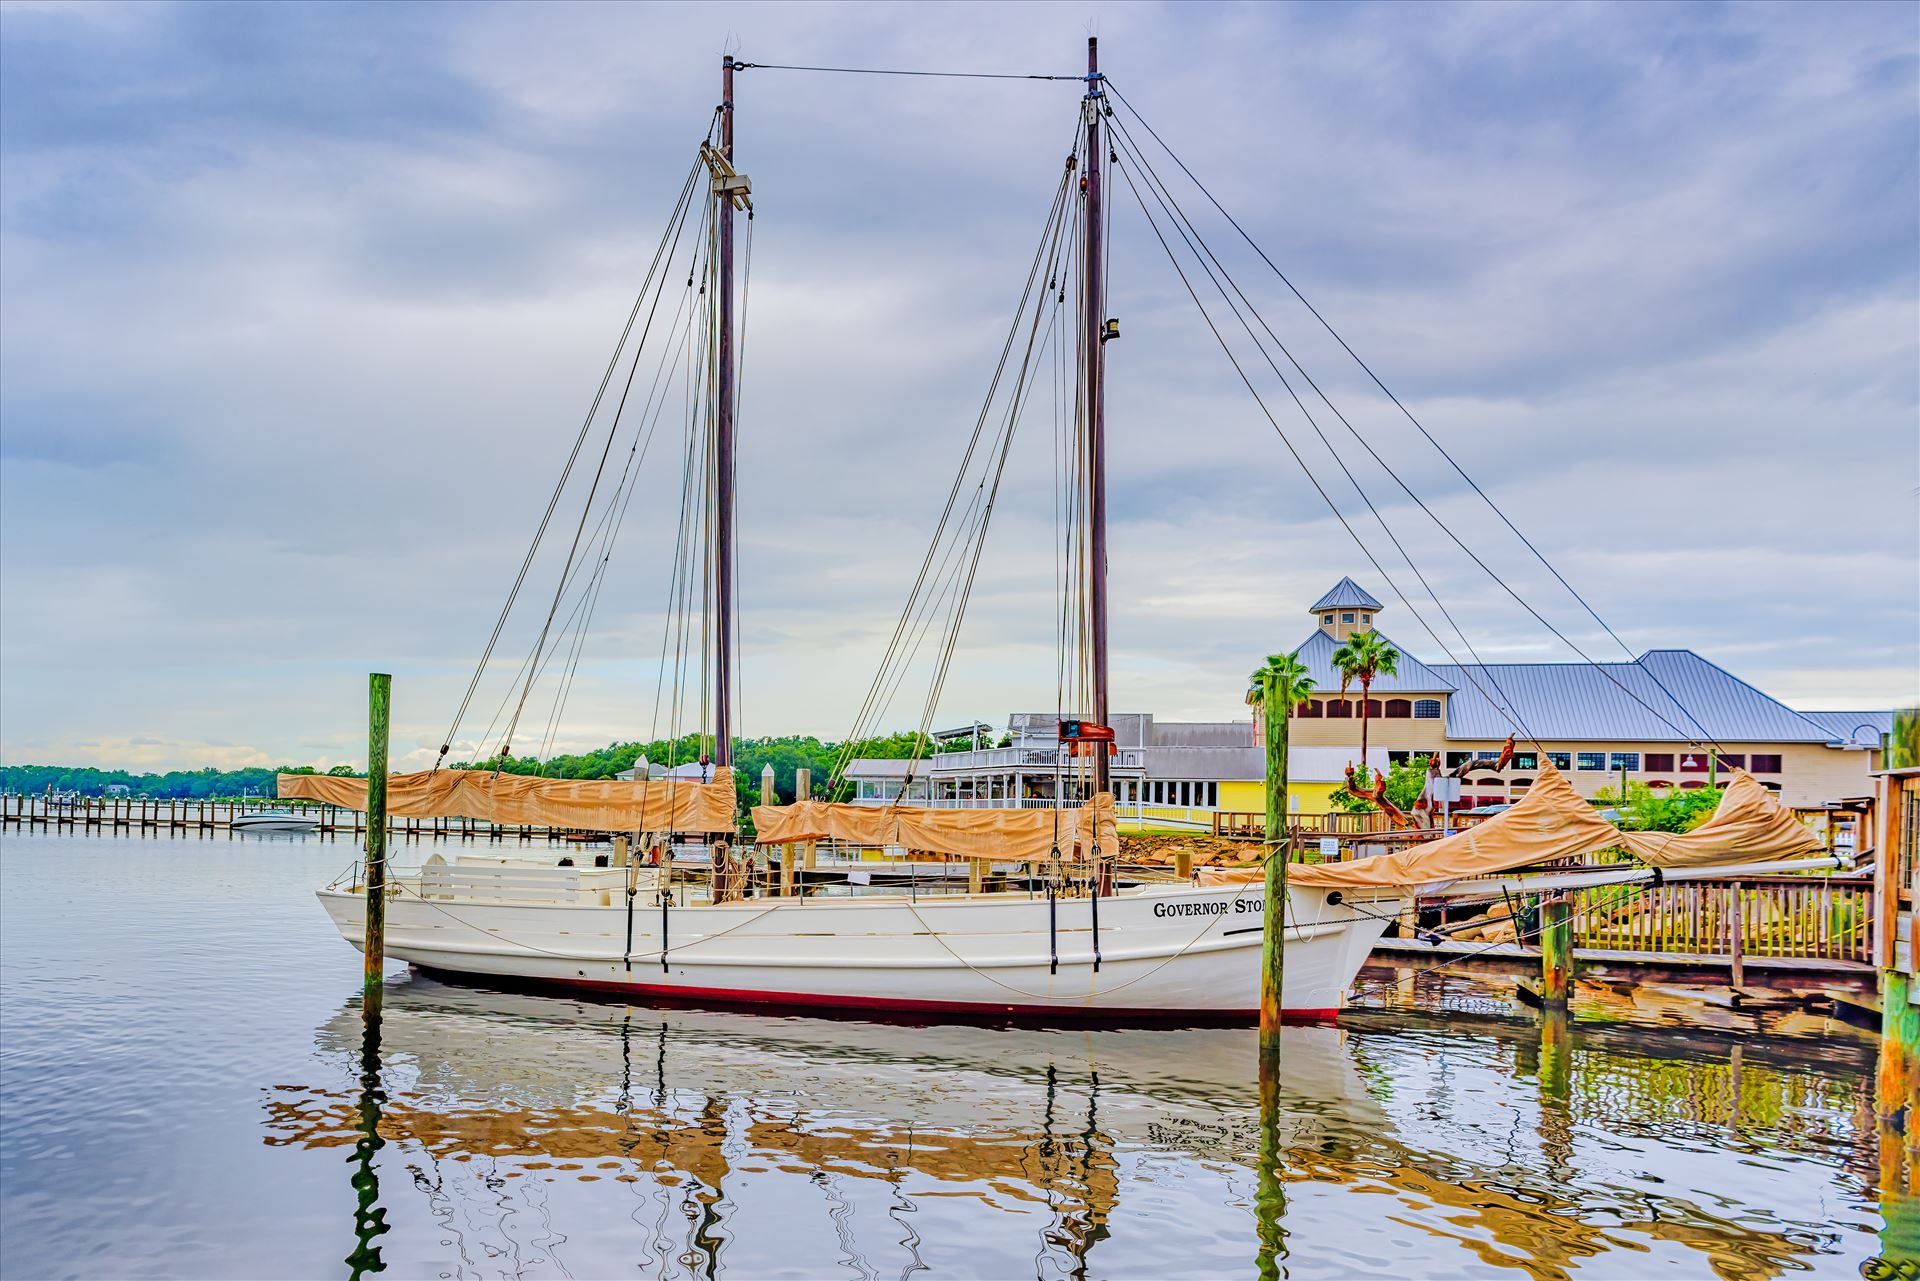 Governor Stone (schooner) - Panama City, Florida, USA. September 16, 2016. Governor Stone is a historic schooner, built in 1877, in Pascagoula, Mississippi. In October 2018, Governor Stone capsized at her dock during Hurricane Michael. by Terry Kelly Photography